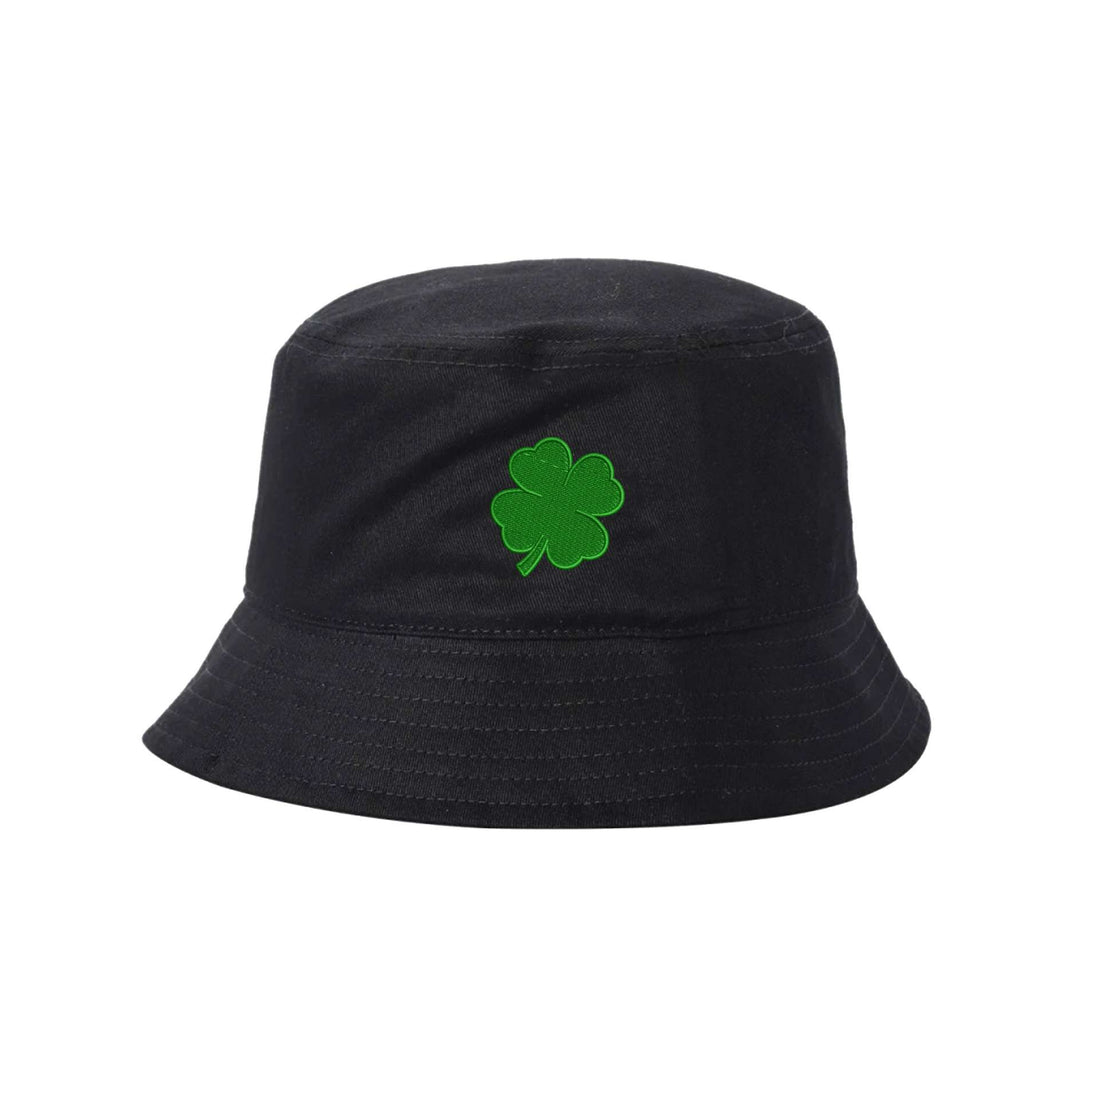 Black bucket hat embroidered with a green four leaf clover- DSY Lifestyle